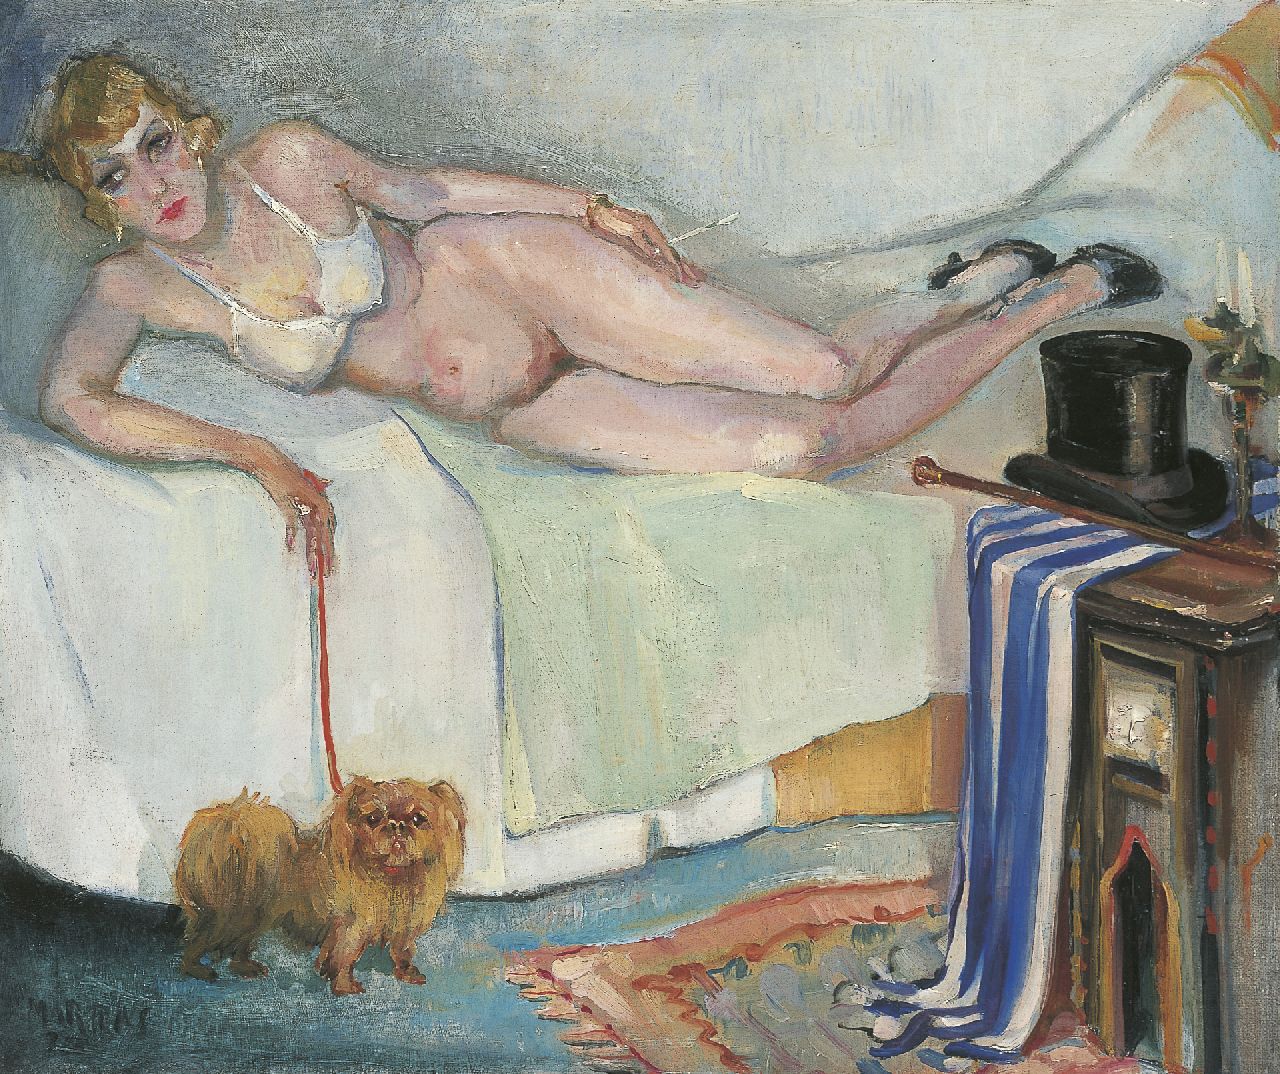 Martens G.G.  | Gijsbert 'George' Martens, A nude smoking, oil on canvas 50.2 x 60.4 cm, signed l.l. and dated '37